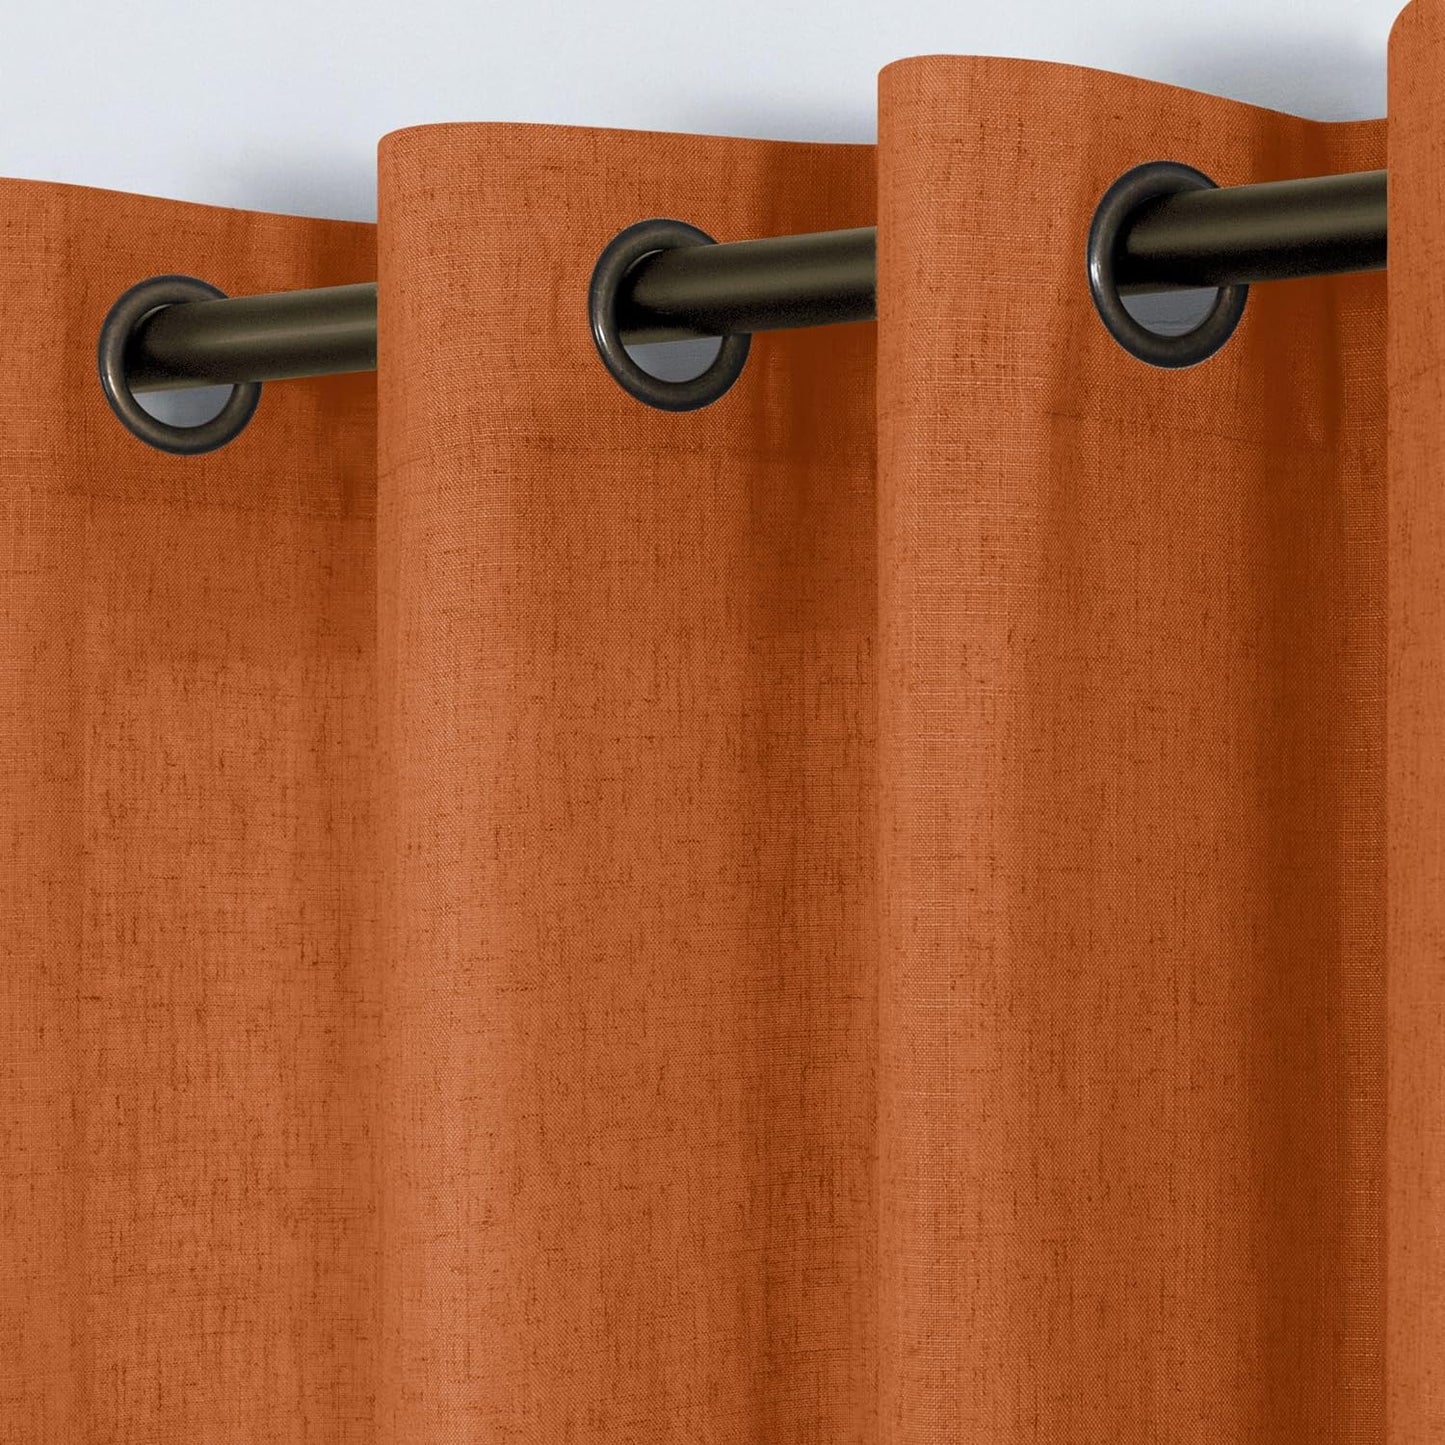 KOUFALL Beige Rustic Country Curtains for Living Room 84 Inches Long Flax Linen Bronze Grommet Tan Sand Color Solid Faux Linen Curtains for Bedroom Sliding Glass Patio Door 2 Panels  KOUFALL TEXTILE Burnt Orange 52X108 